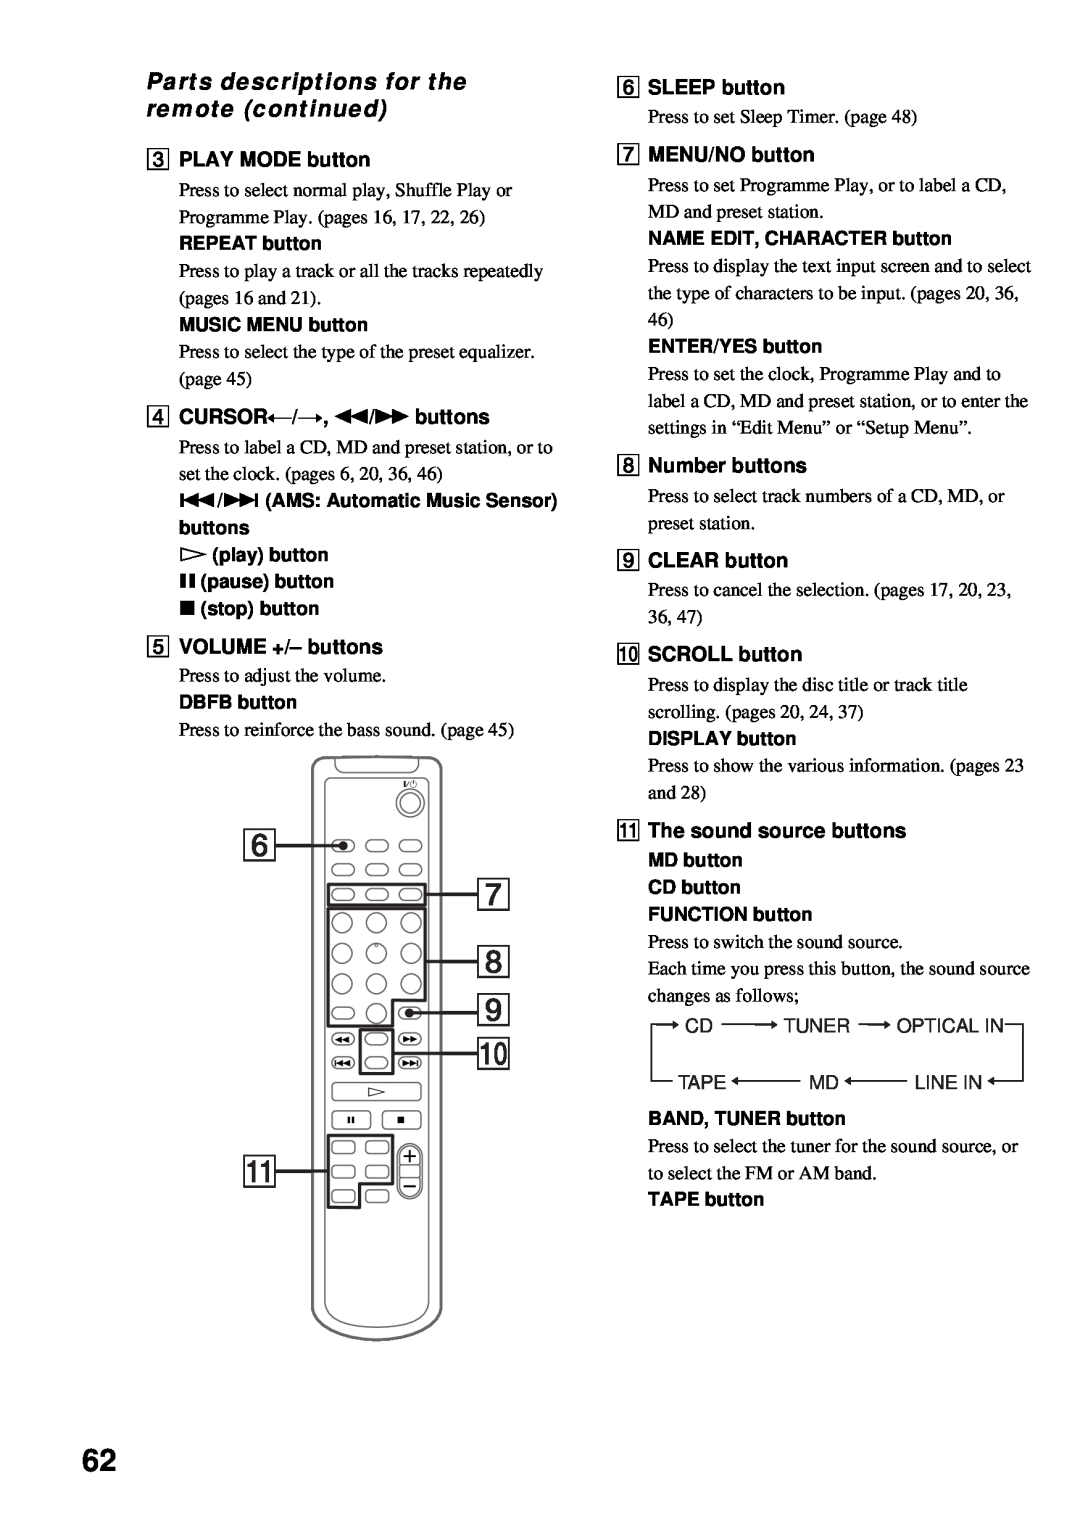 Sony DHC-MD373 Parts descriptions for the remote continued, 3PLAY MODE button, 4CURSORT/t, m/M buttons, 6SLEEP button 